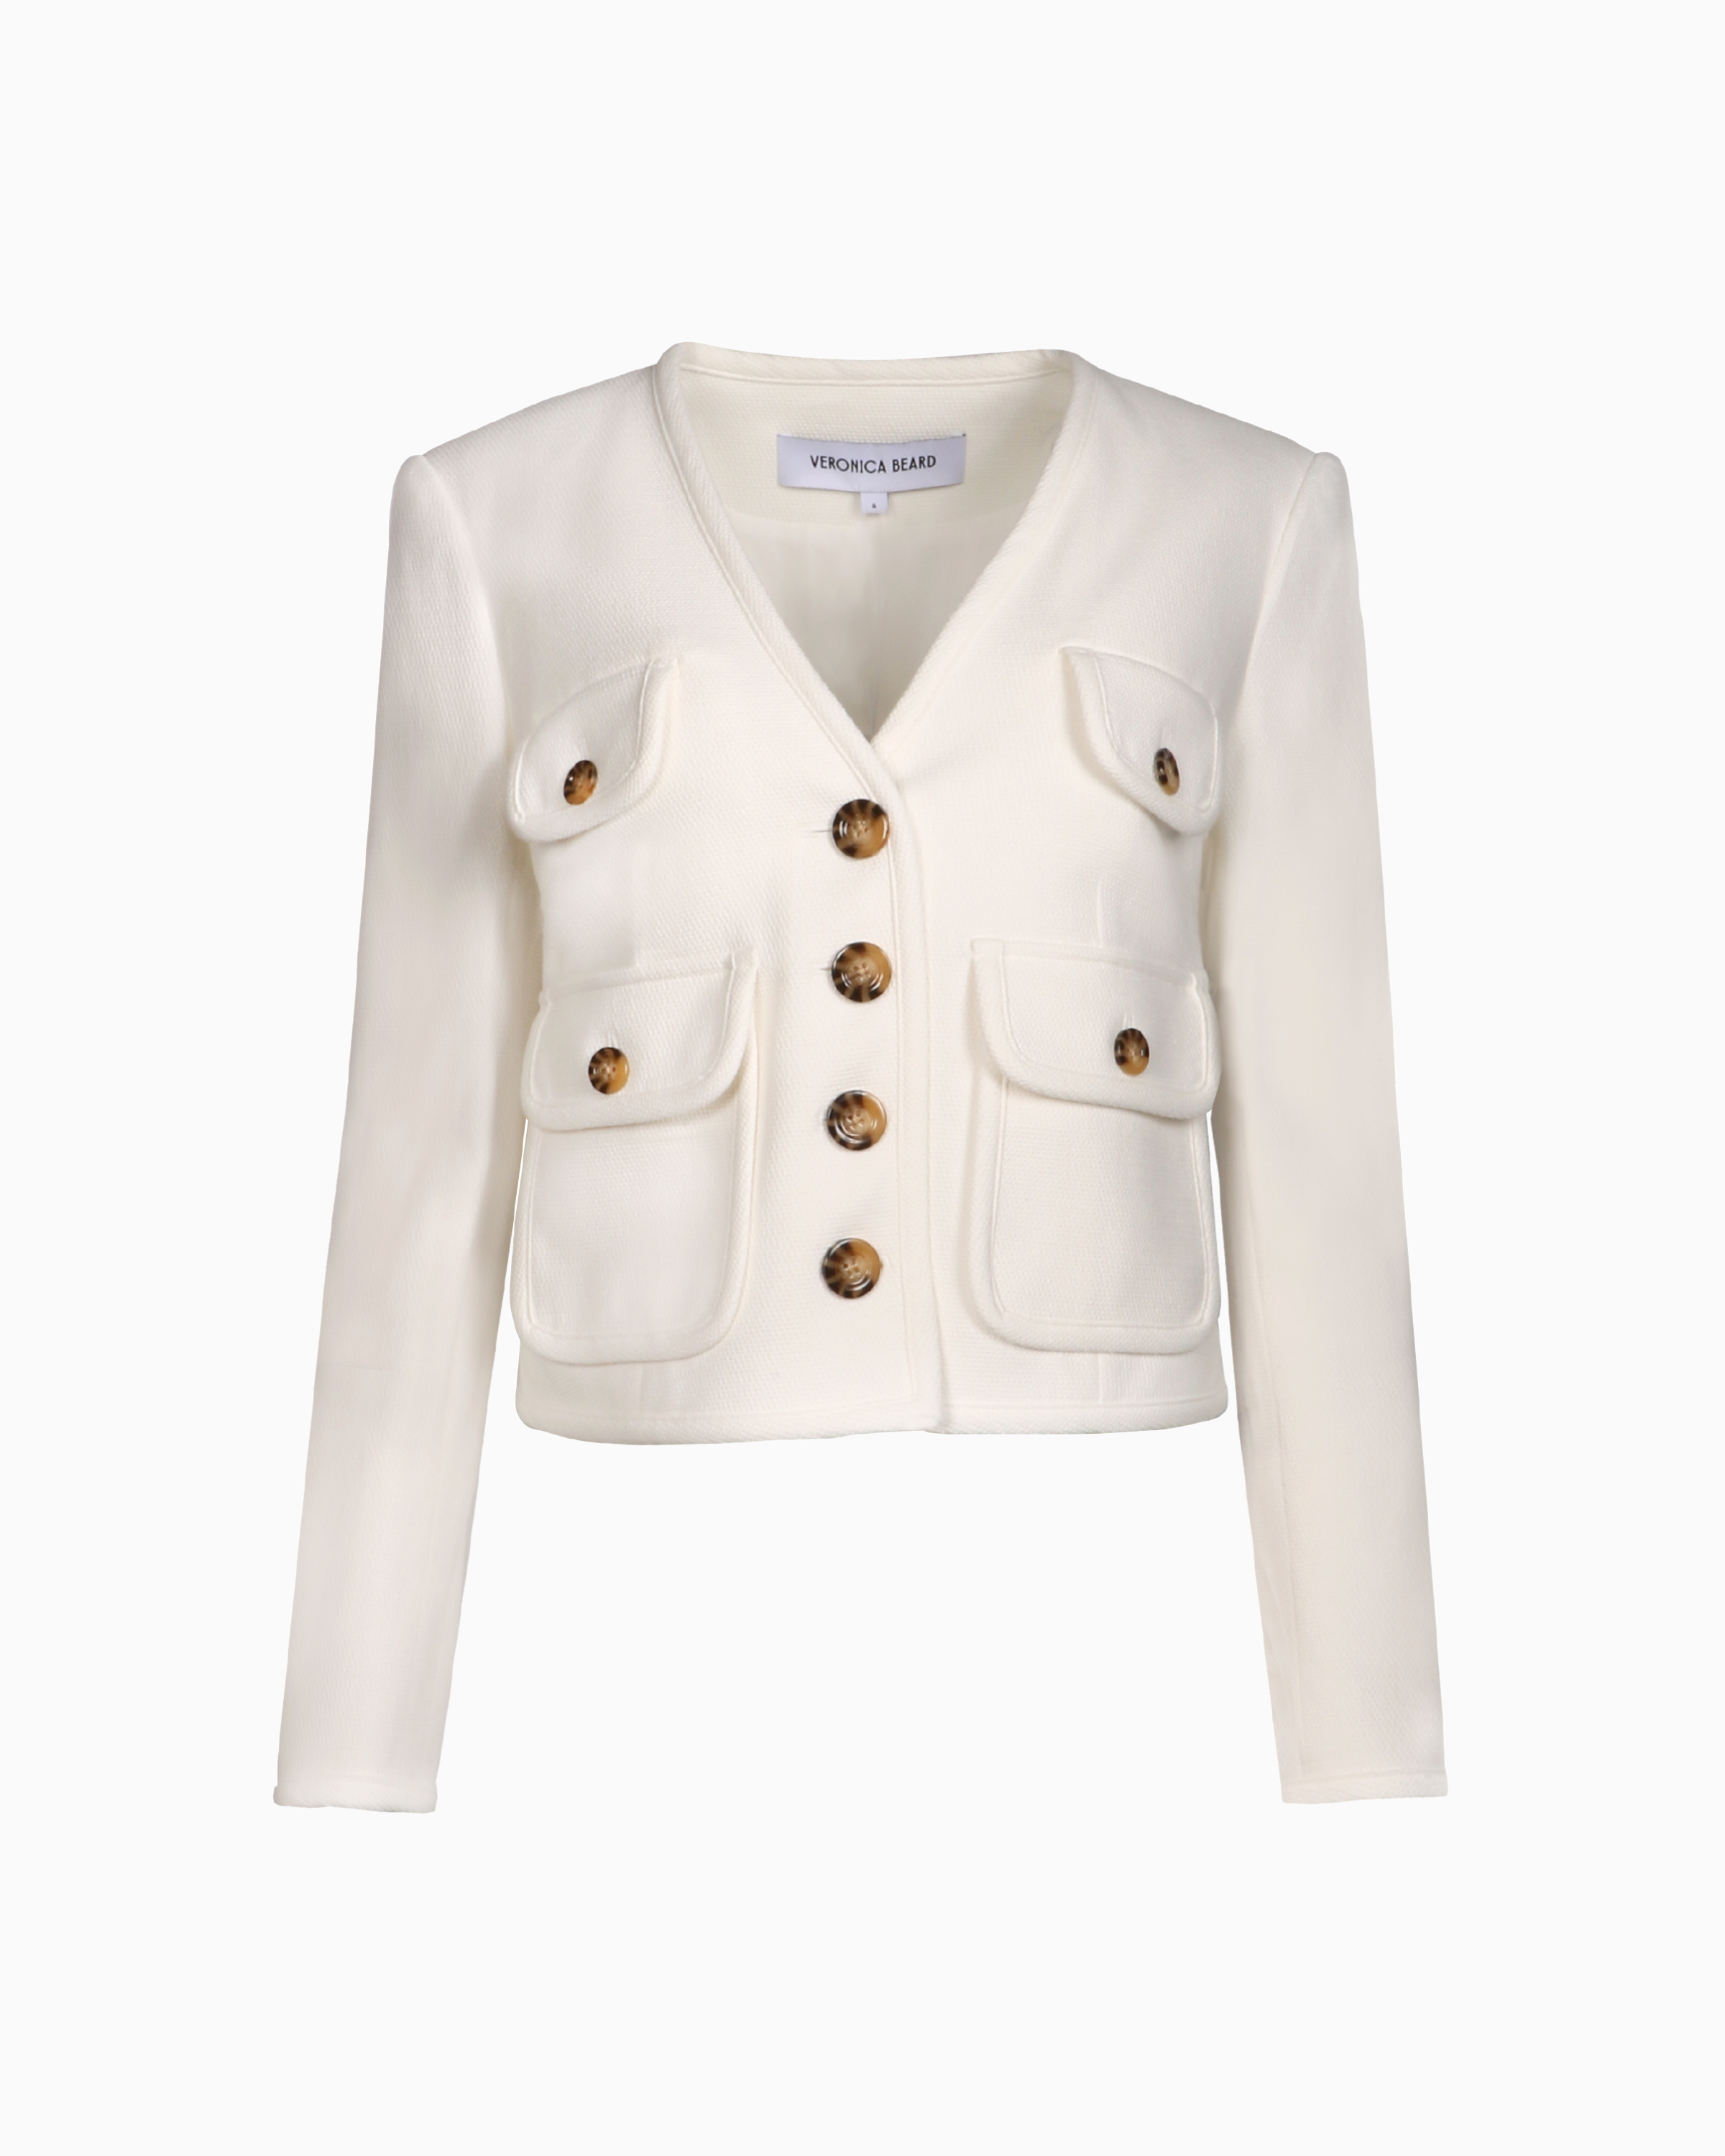 Veronica Beard Isola Jacket in Off White